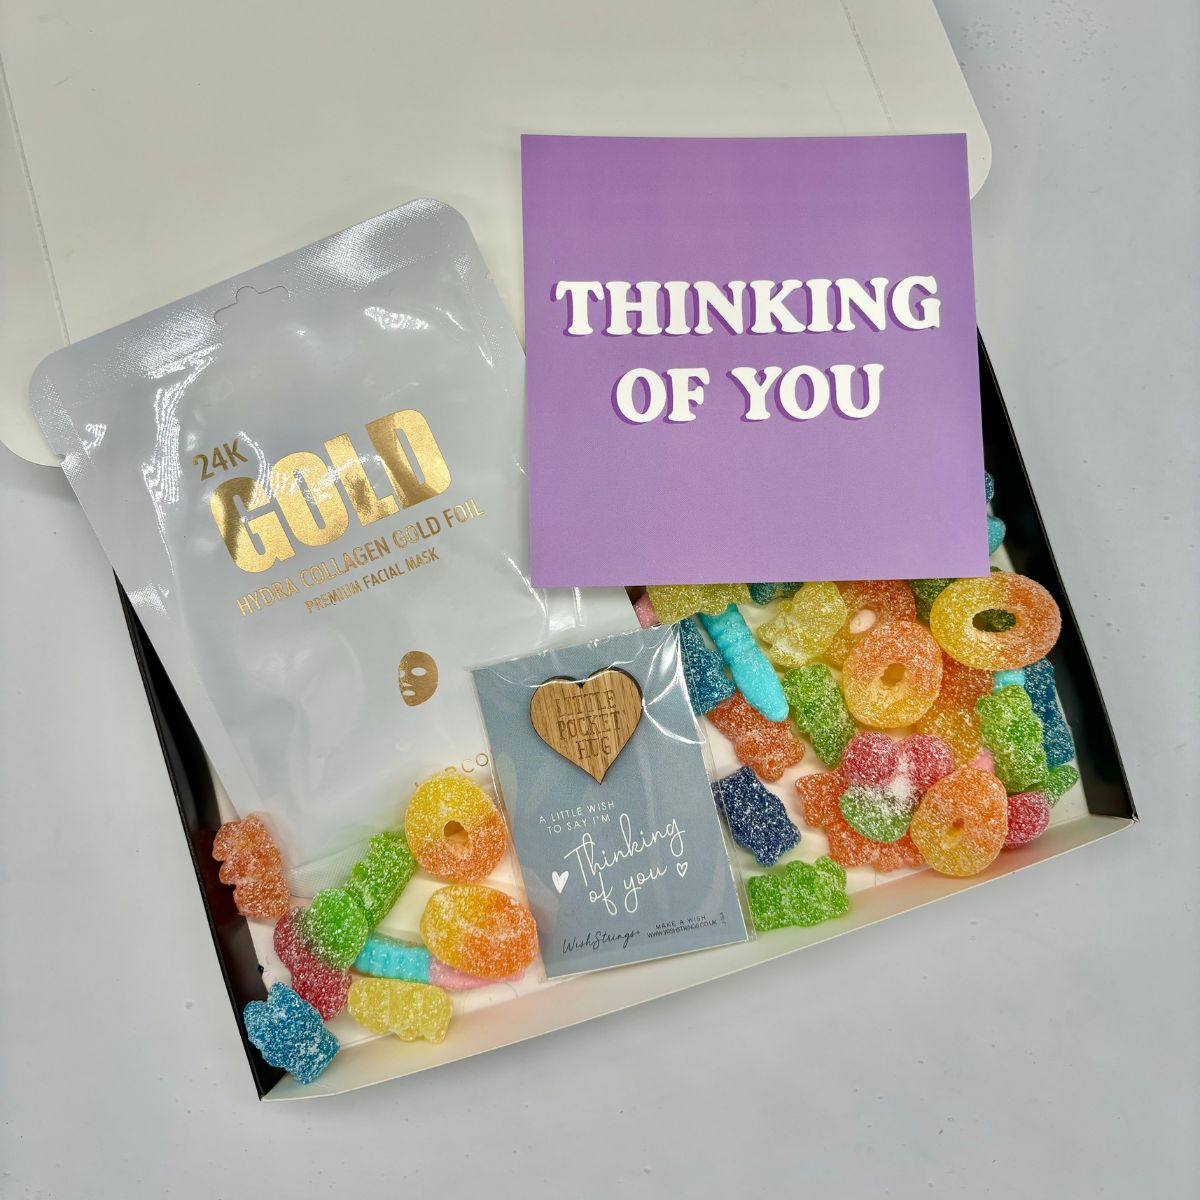 Thinking of You  Letterbox Gift Box with Sweets